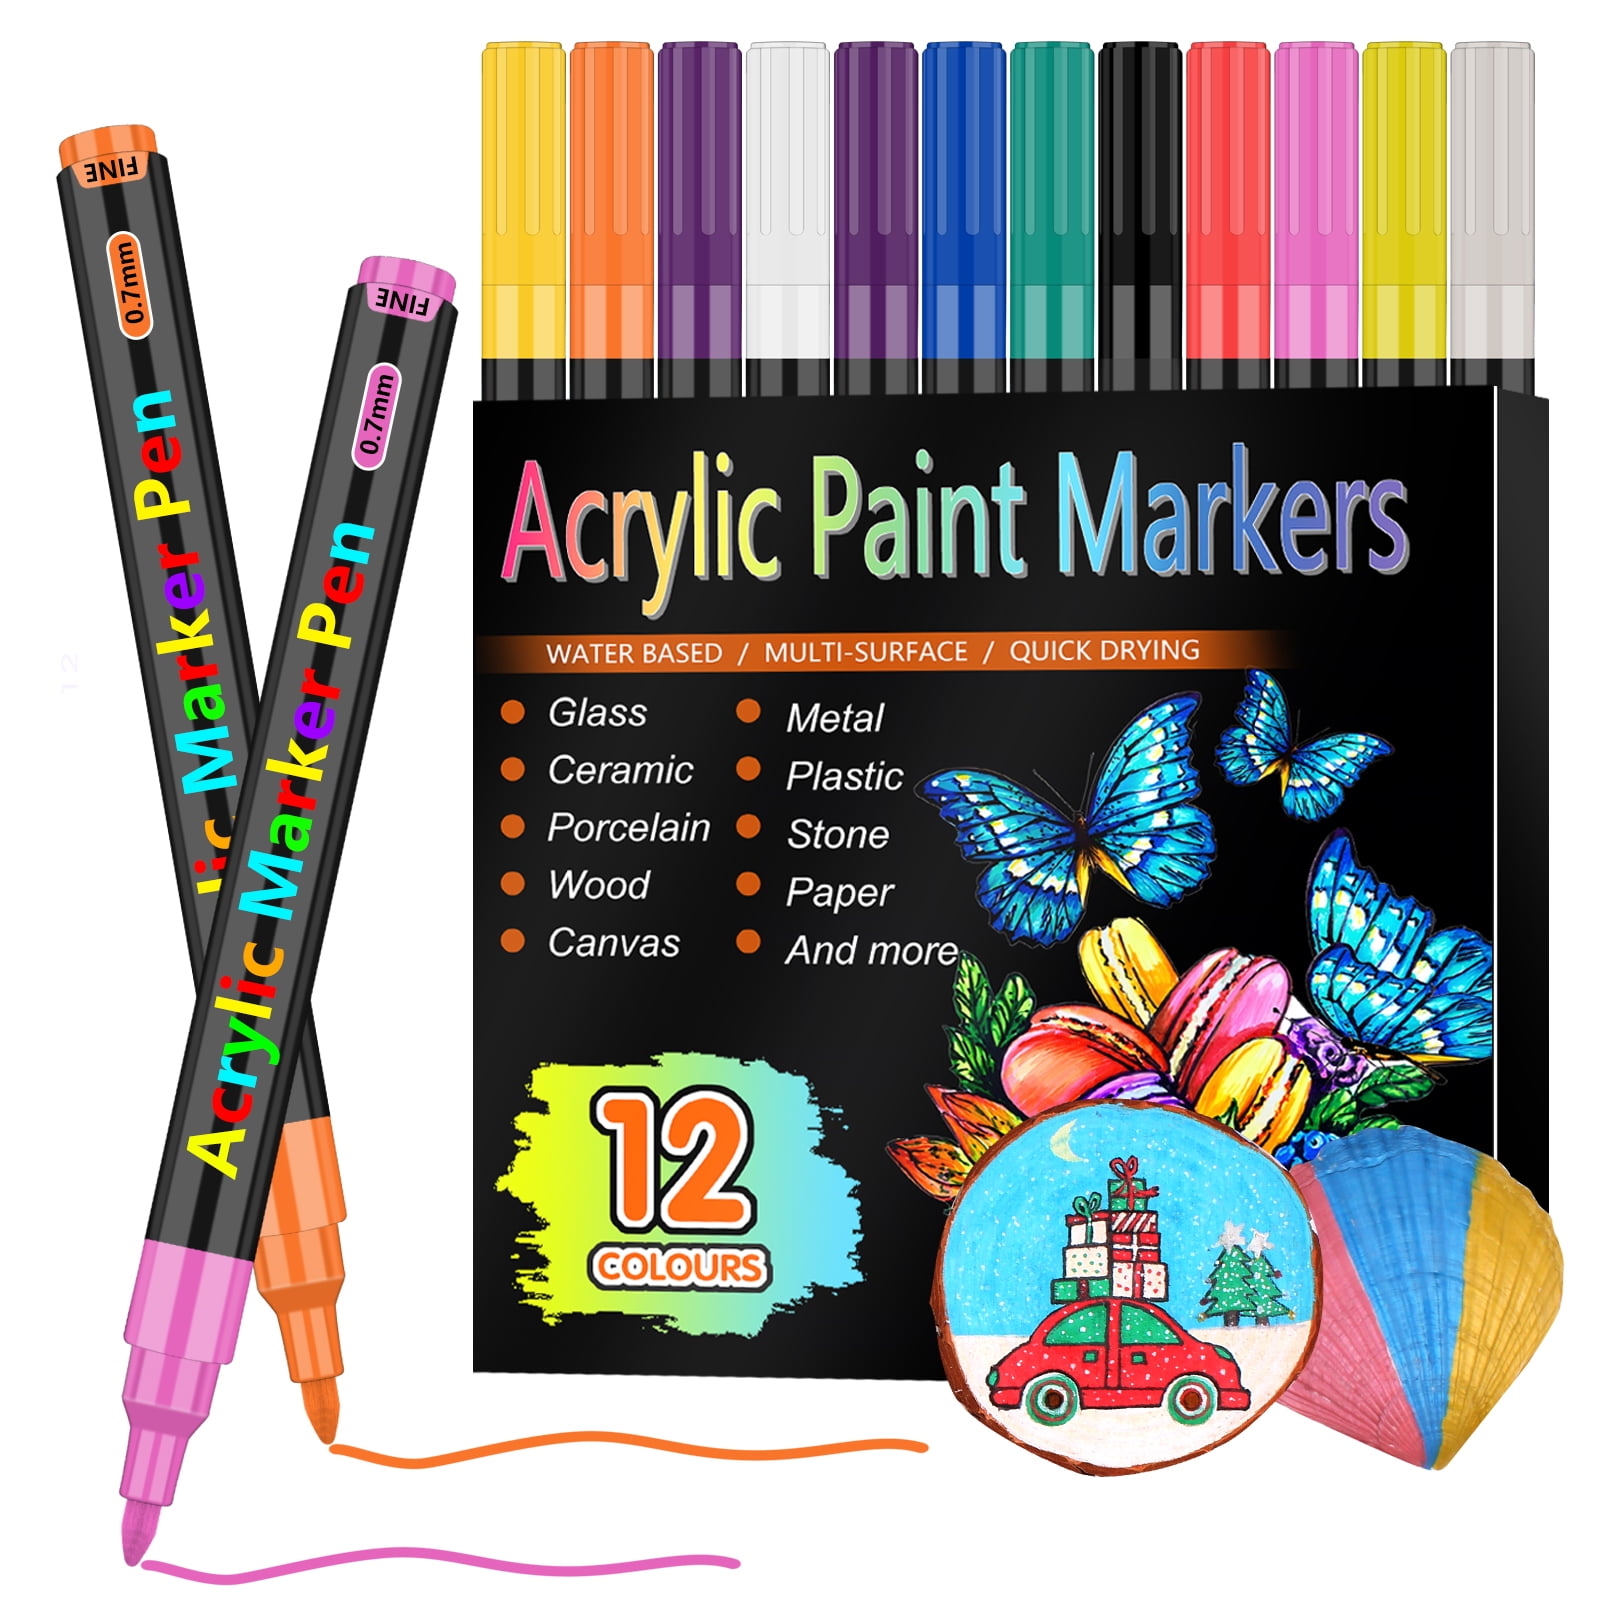 Baker Ross AW424 Neon Brights Porcelain Paint Pens - Pack of 8, Broad Tipped, Oil Based Acrylic Markers for Kids Arts and Crafts Porcelain and Ceramic